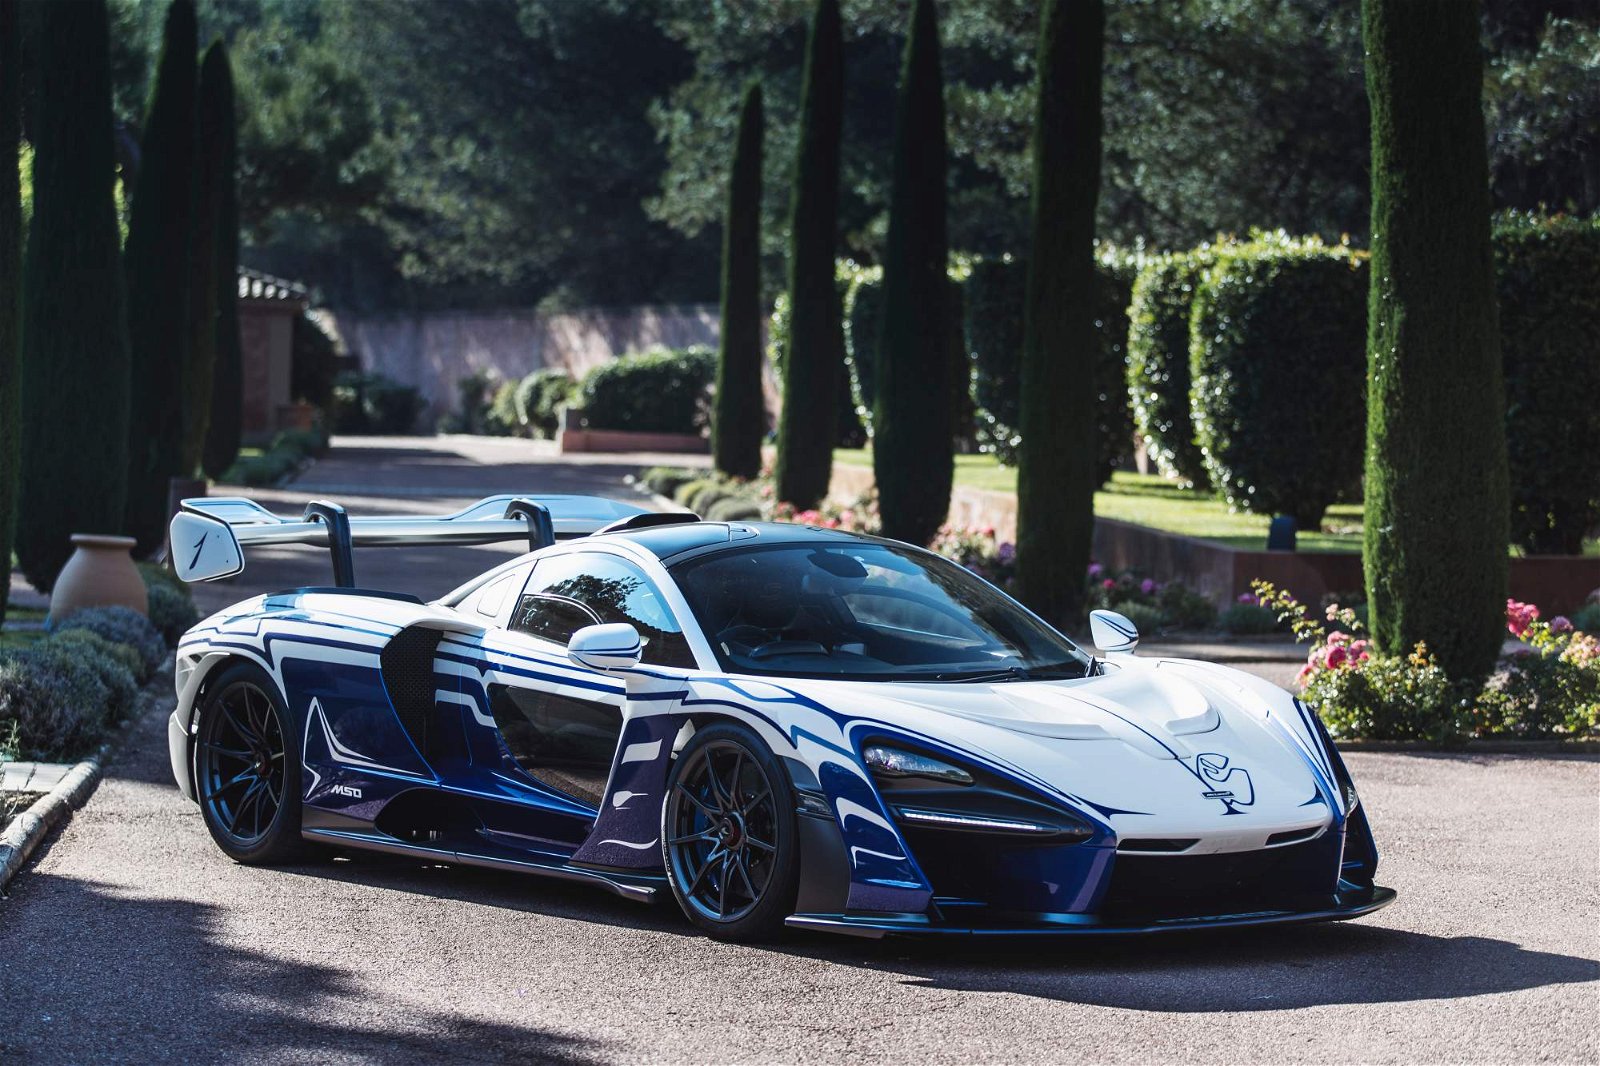 McLaren-Senna-chassis-001-on-maiden-road-trip-to-Paul-Ricard-circuit-11